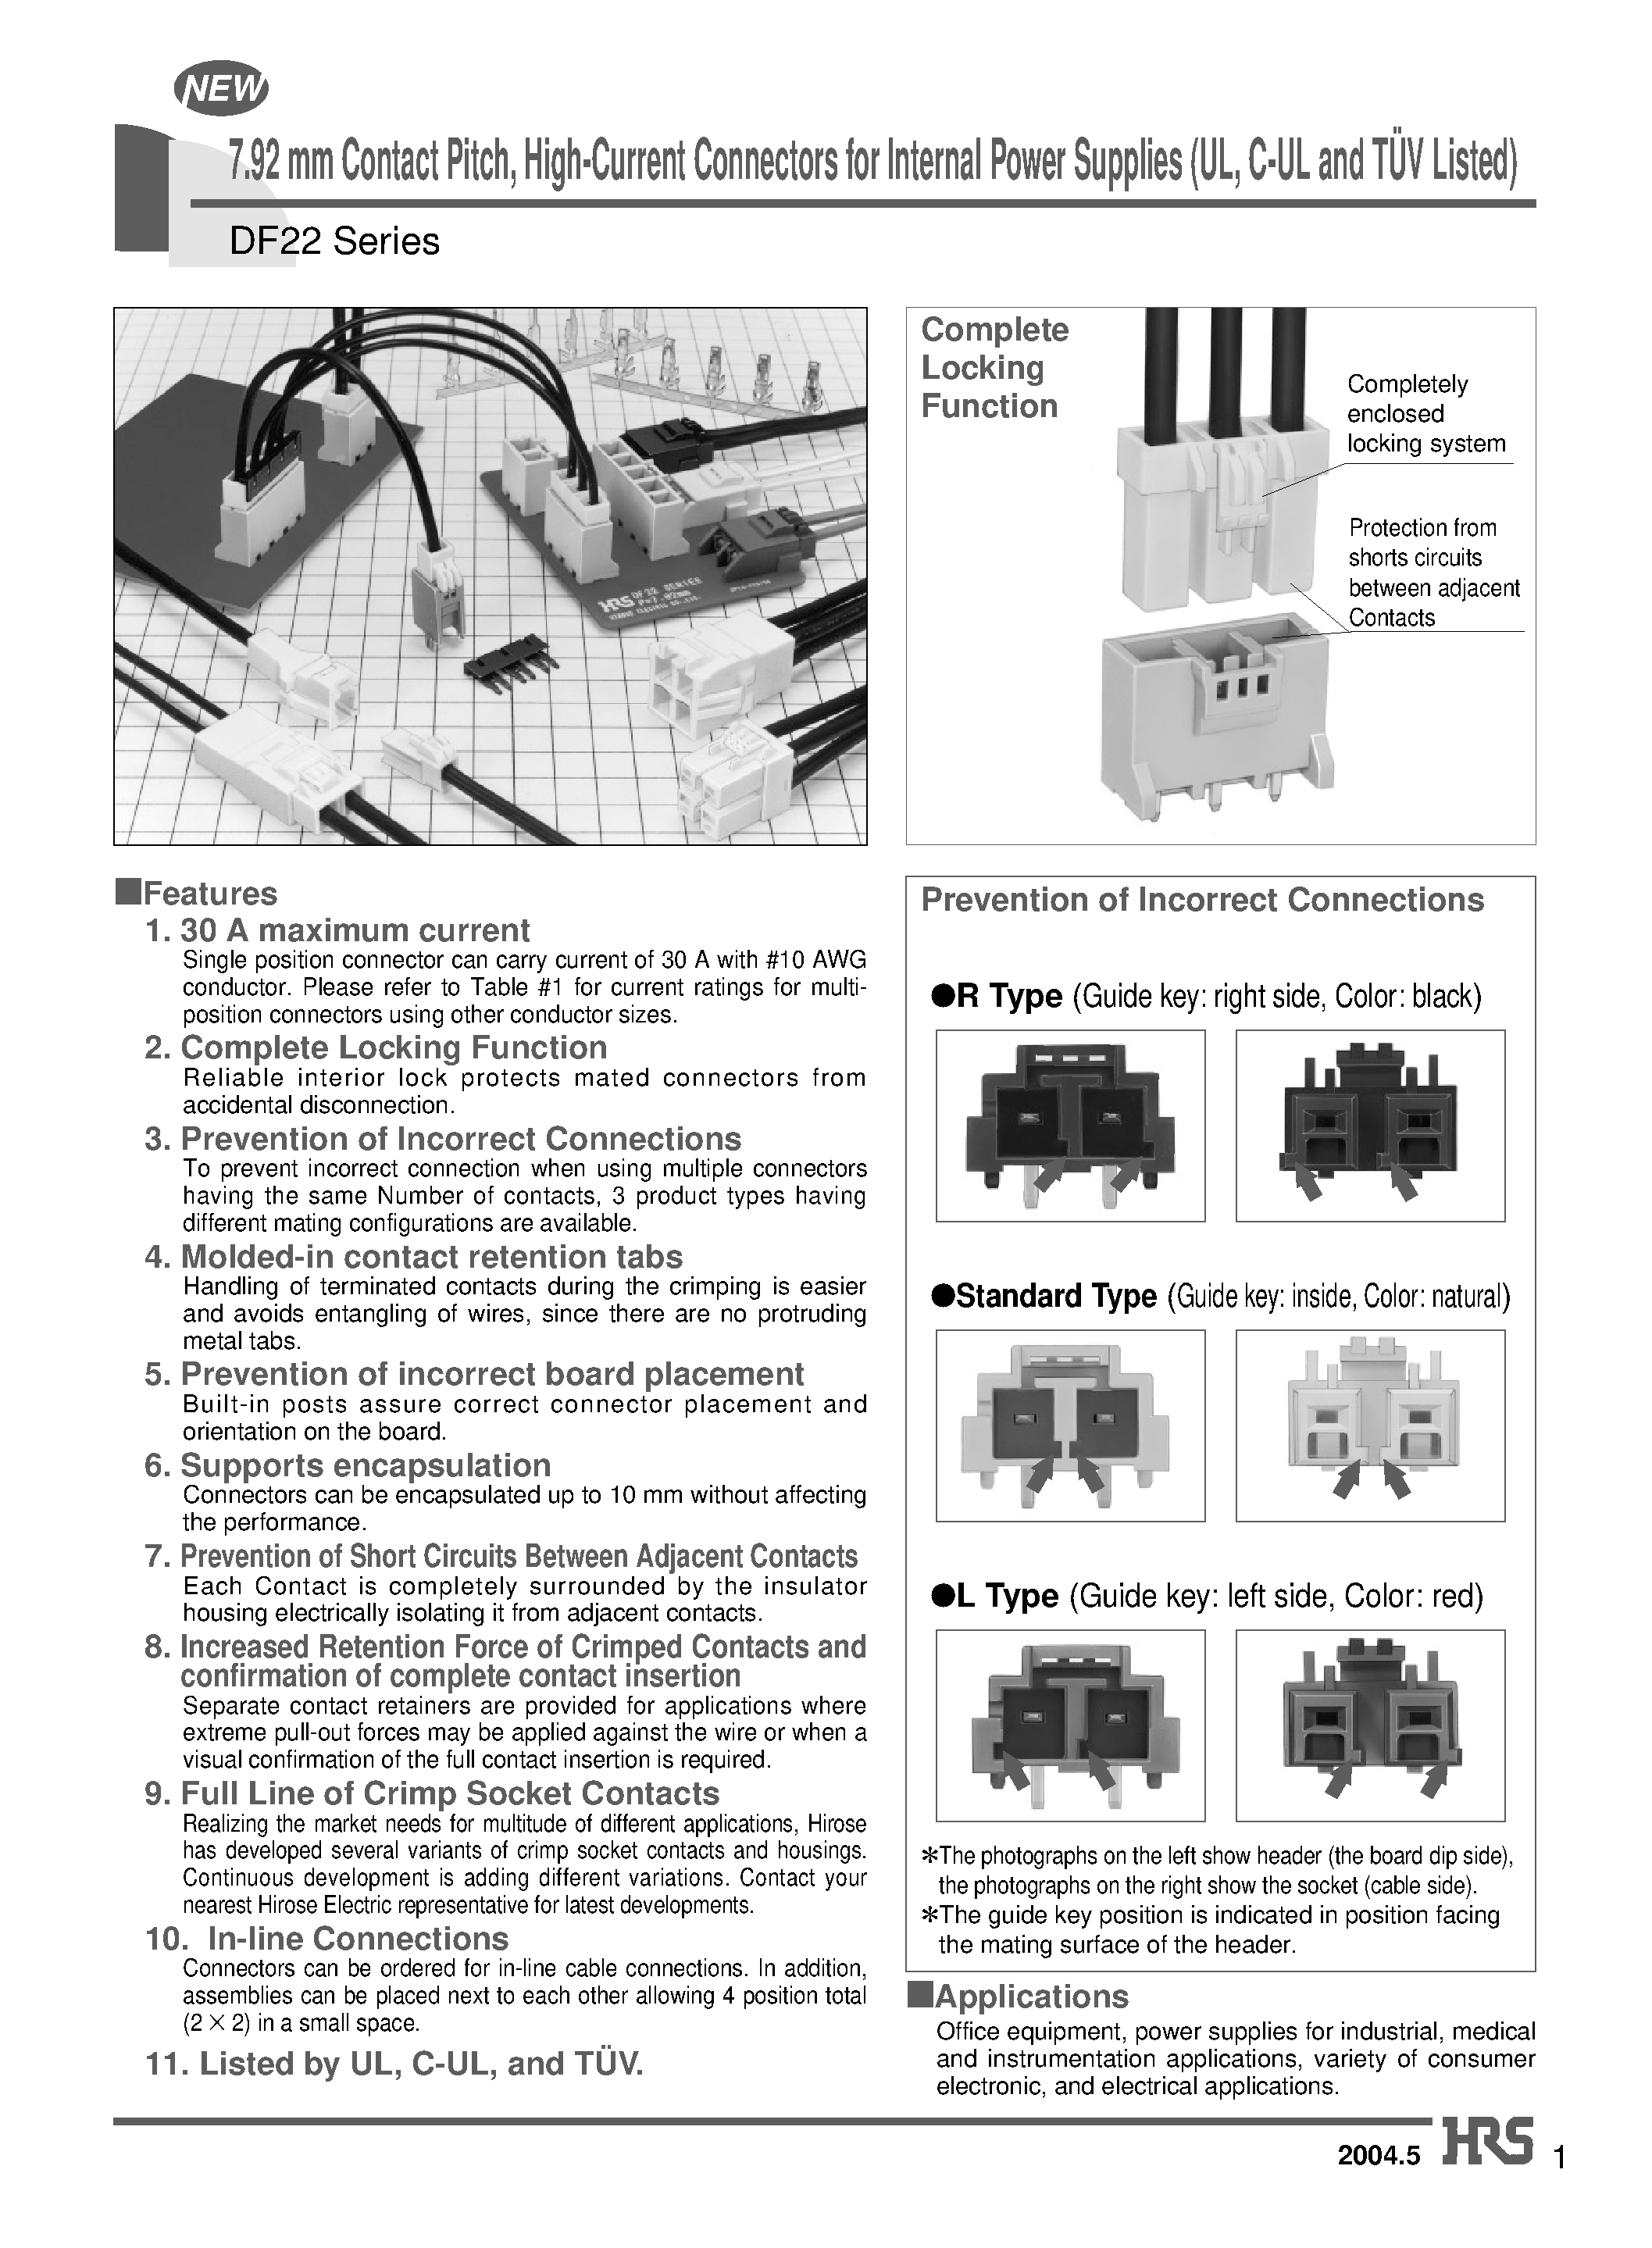 Даташит DF22A-5S-7.92C - 7.92 mm Contact Pitch/ High-Current Connectors for Internal Power Supplies (UL/ C-UL and TUV Listed) страница 1